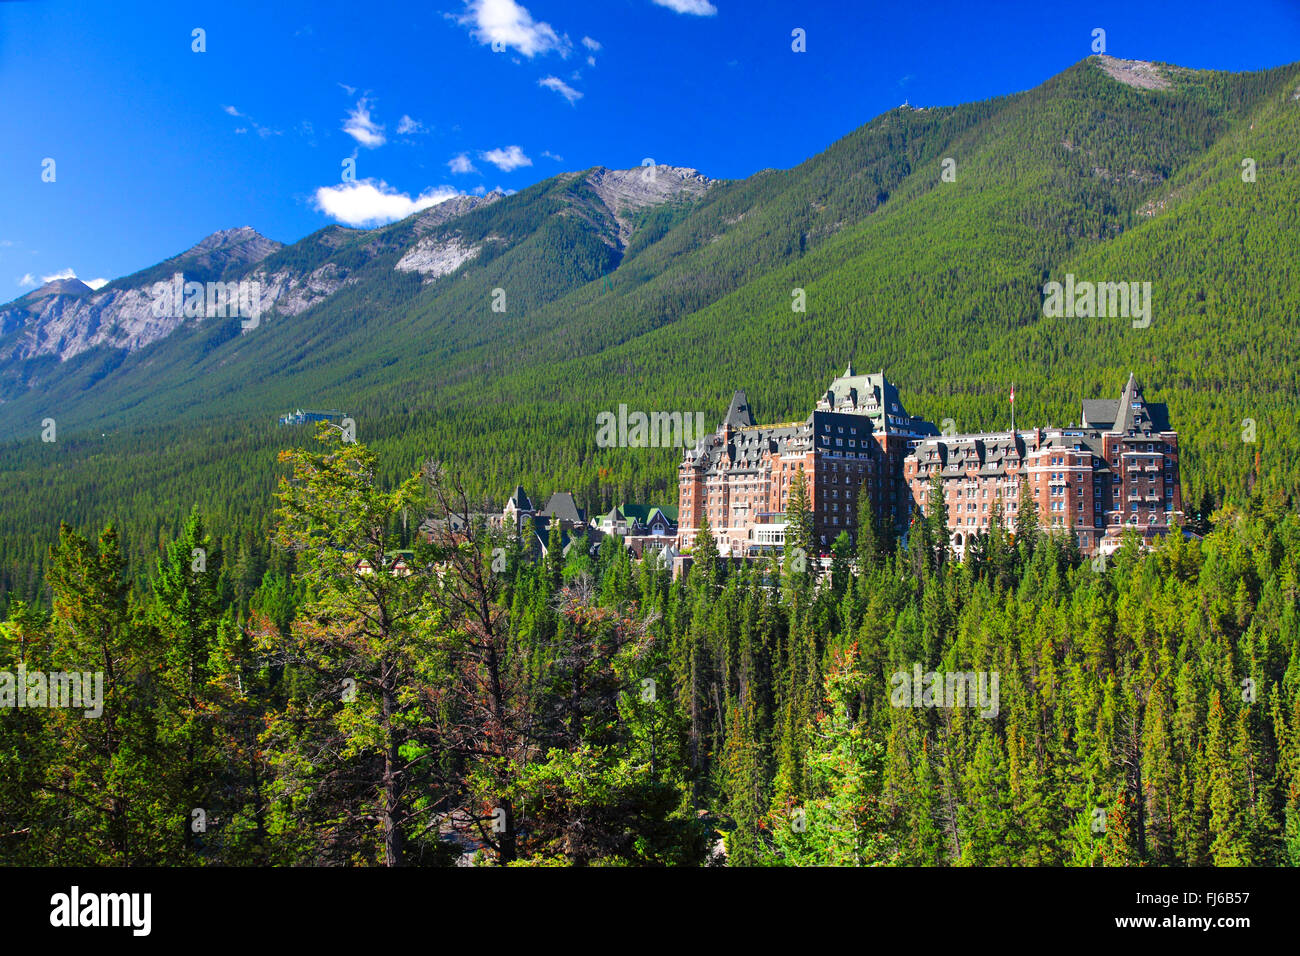 Bow River Valley with Banff Springs Hotel, Canada, Alberta, Banff National Park Stock Photo